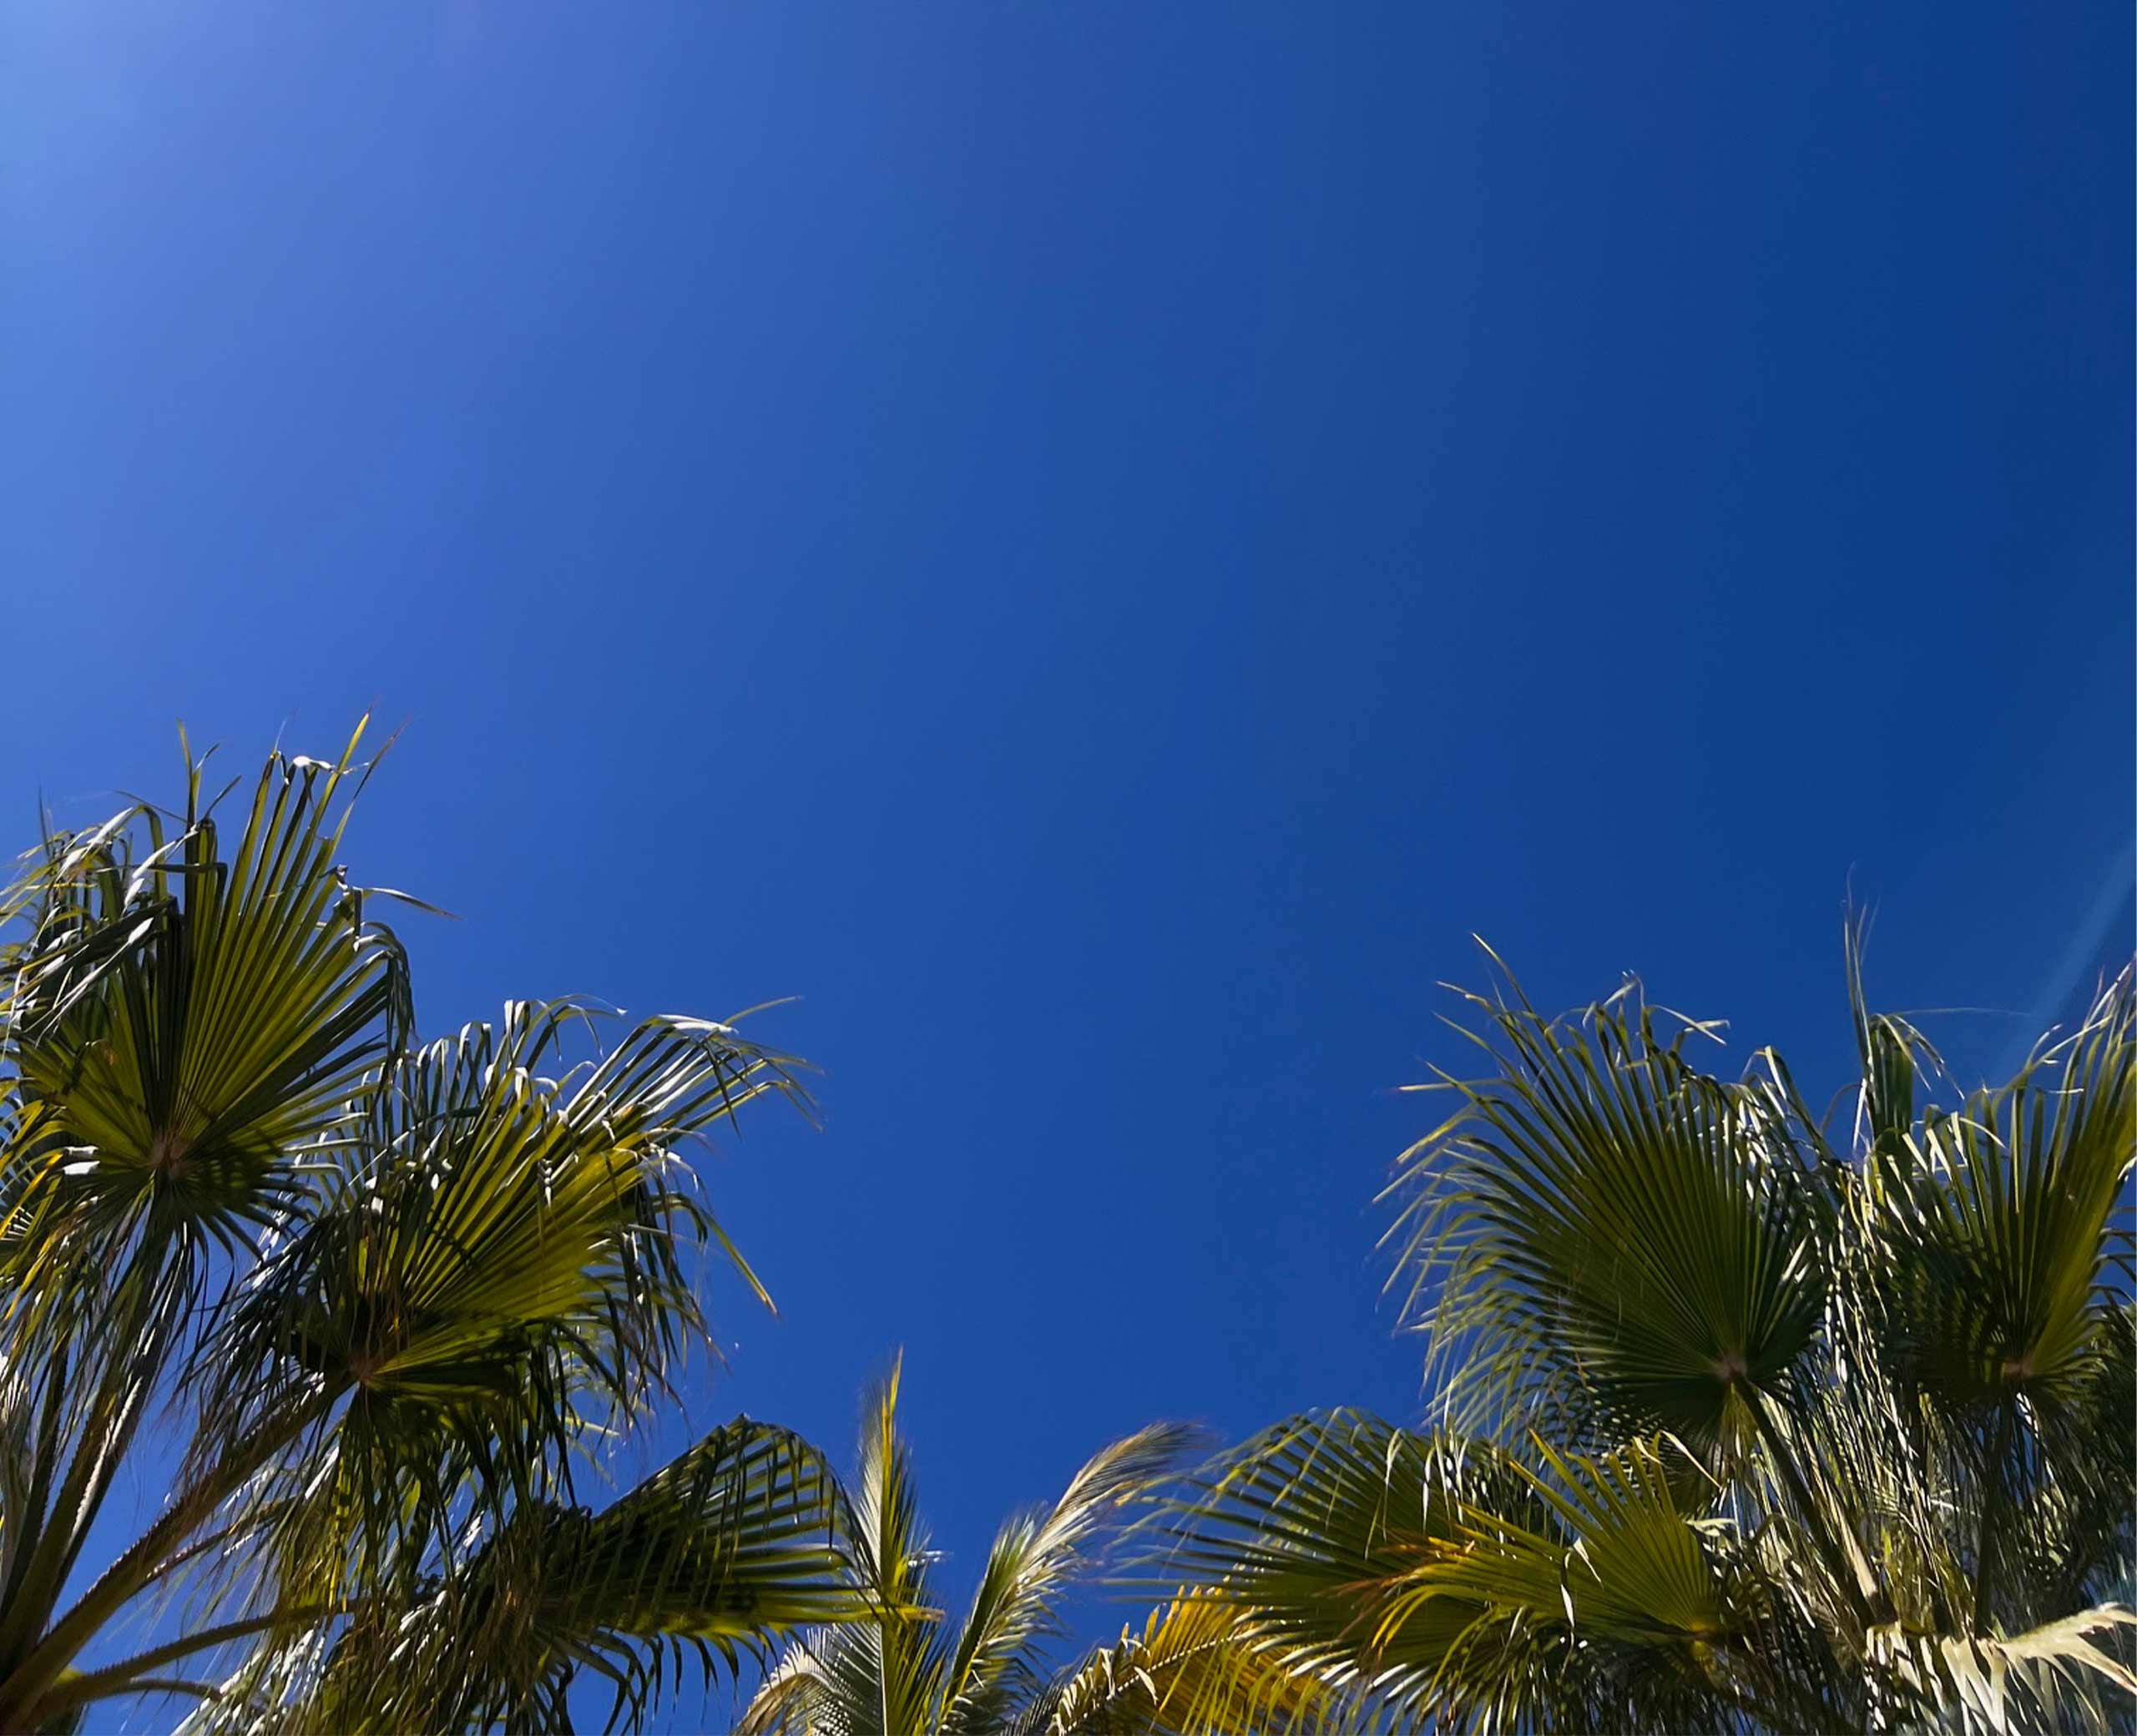 upwards shot of palm tree leaves with blue sky